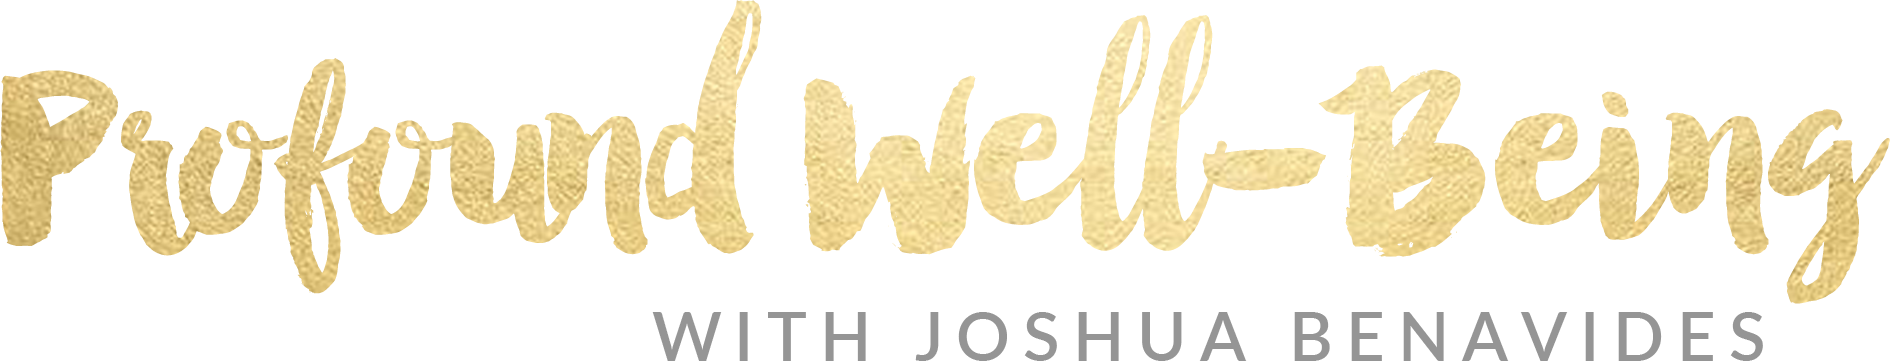 Profound Well-Being with Joshua Benavides